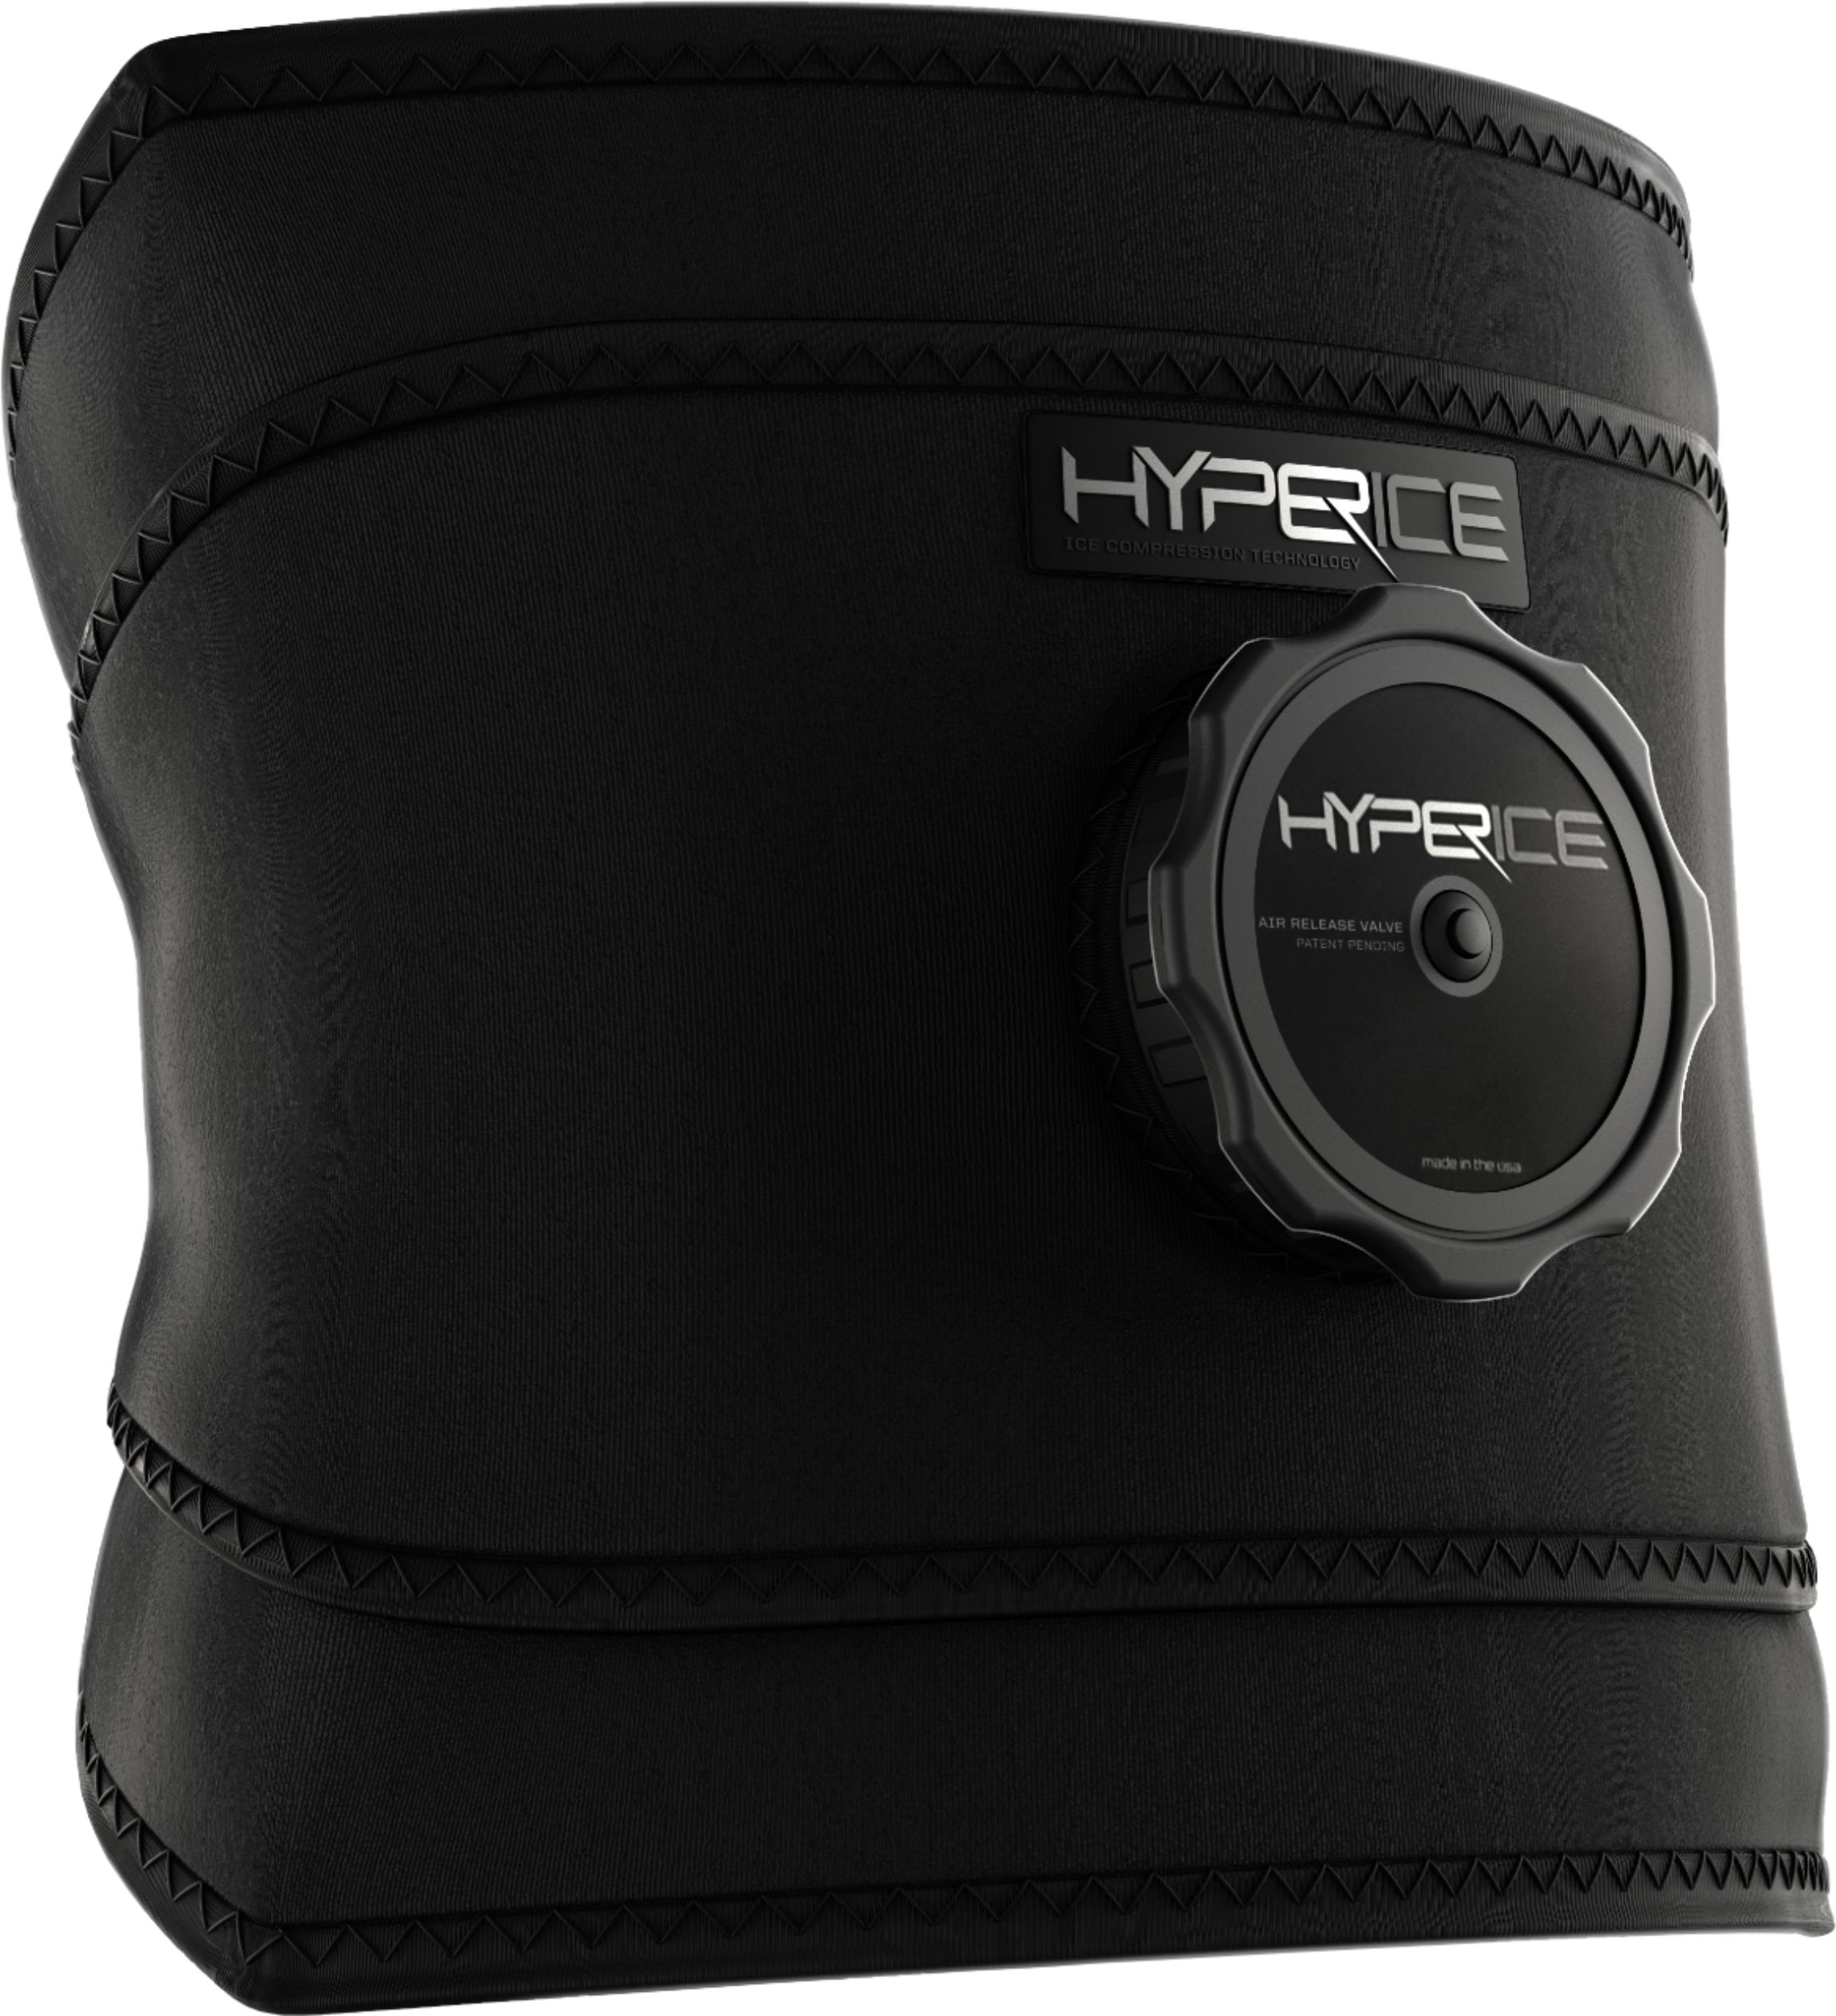 Hyperice Back Ice Compression Wearable - Black